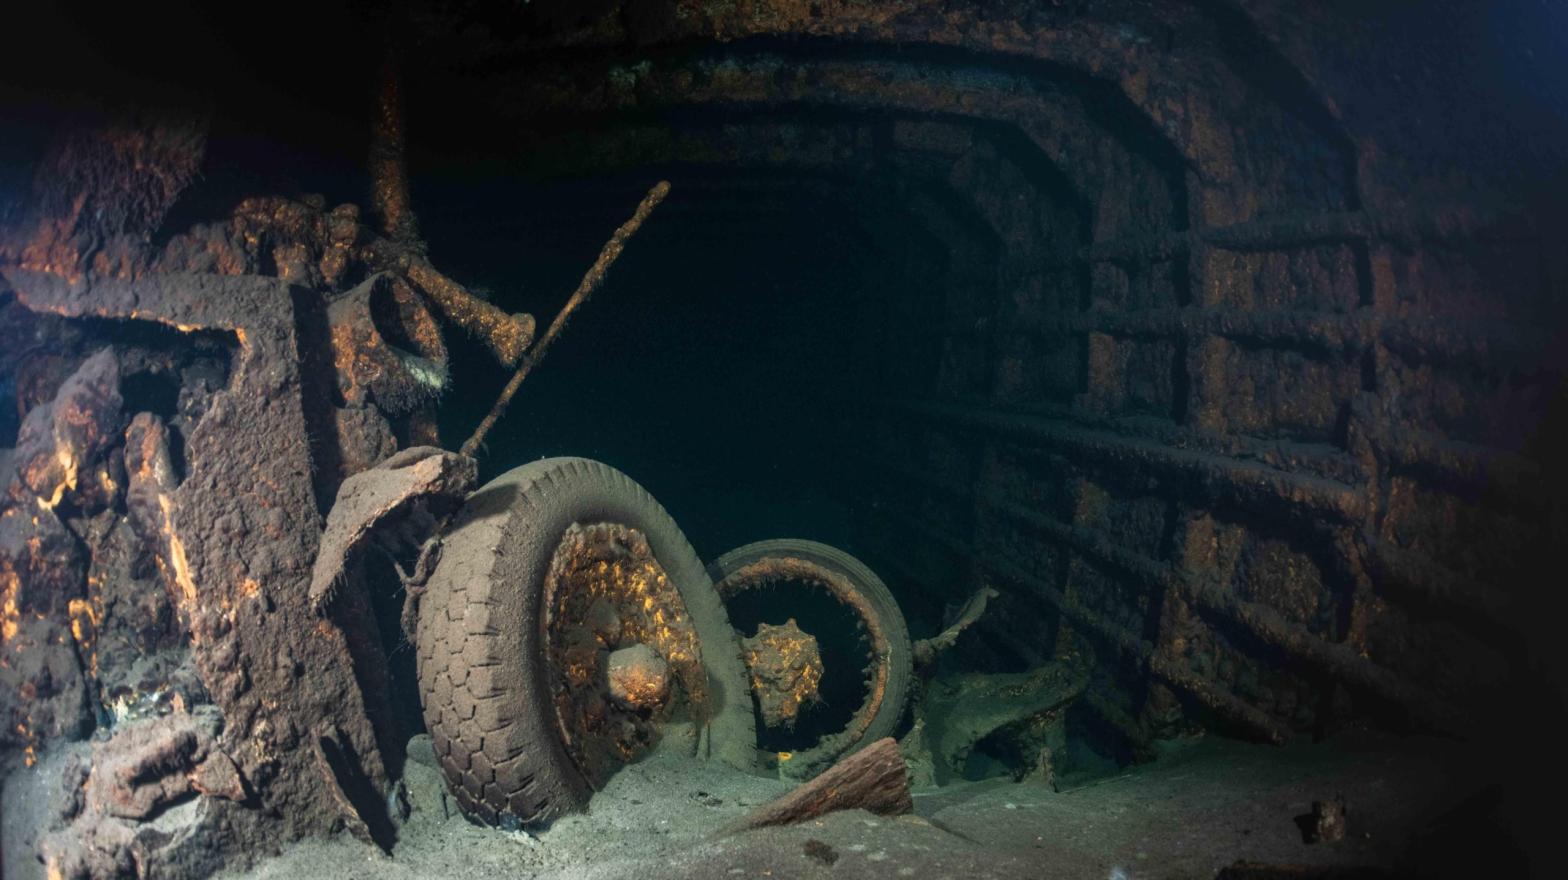 A rusted vehicle in the wreck of the Karlsruhe. (Photo: TOMASZ STACHURA / SANTI)